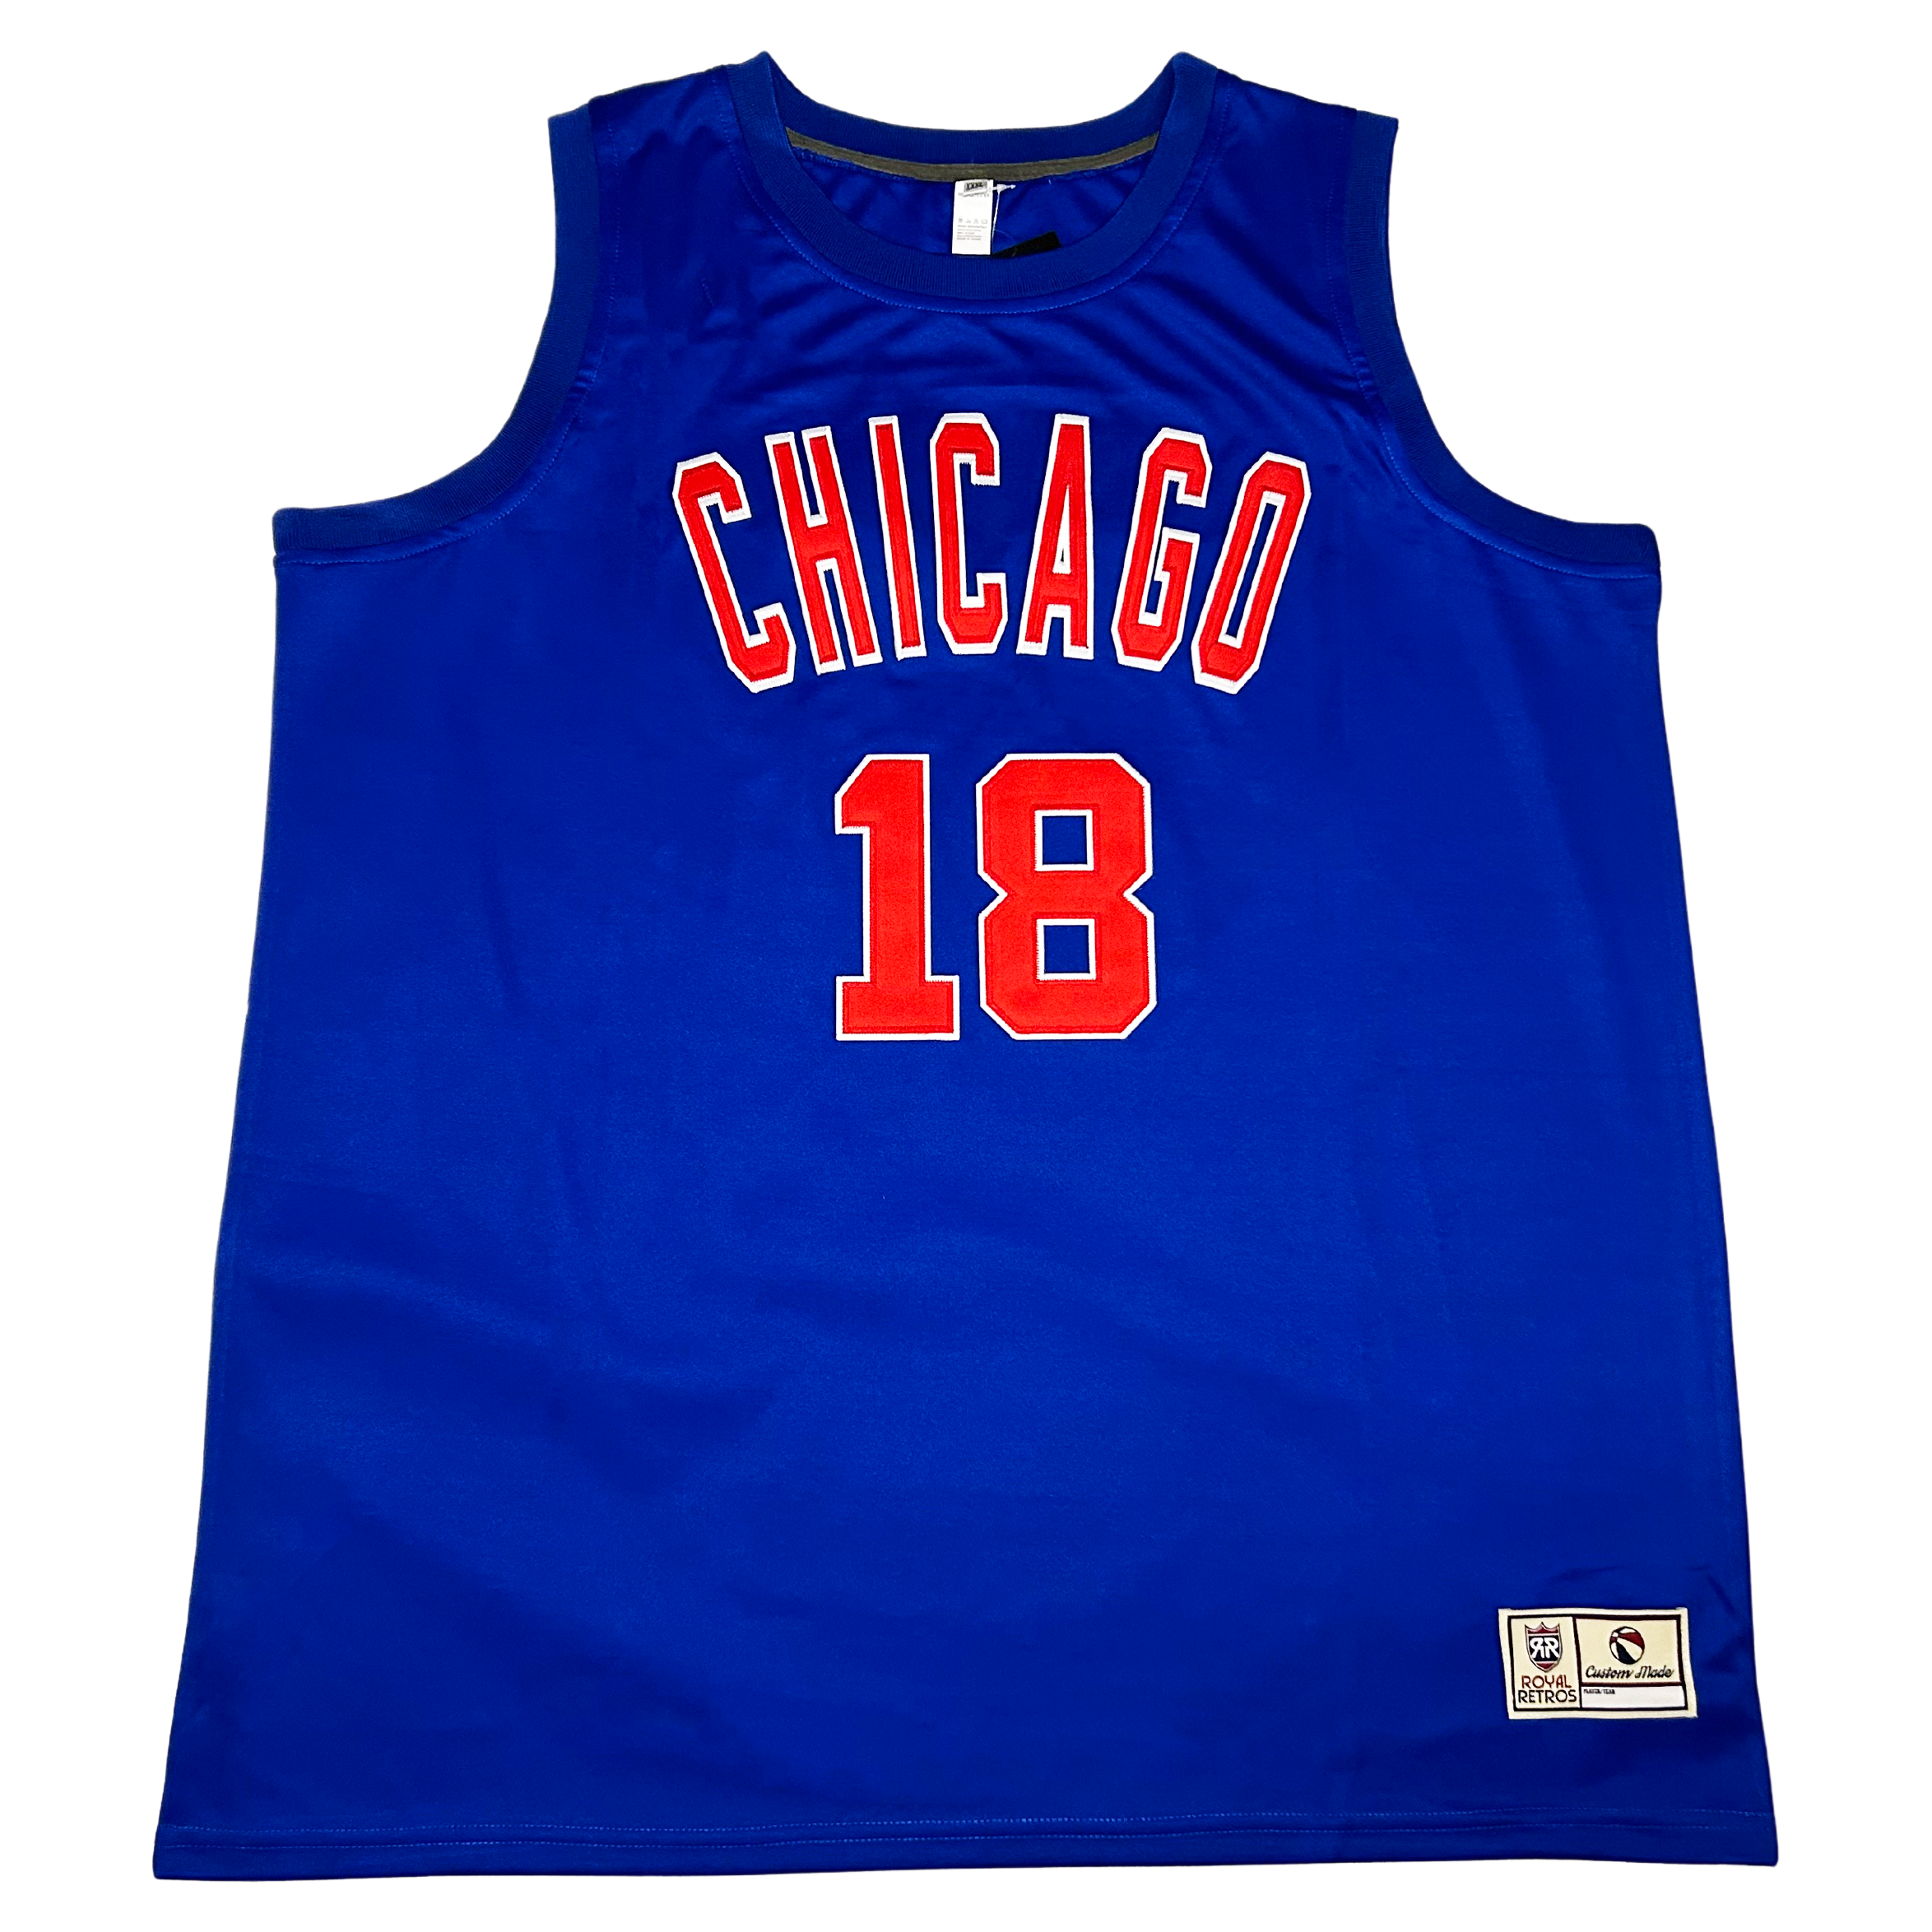 Chicago Stags Jersey - Red - Medium - Royal Retros